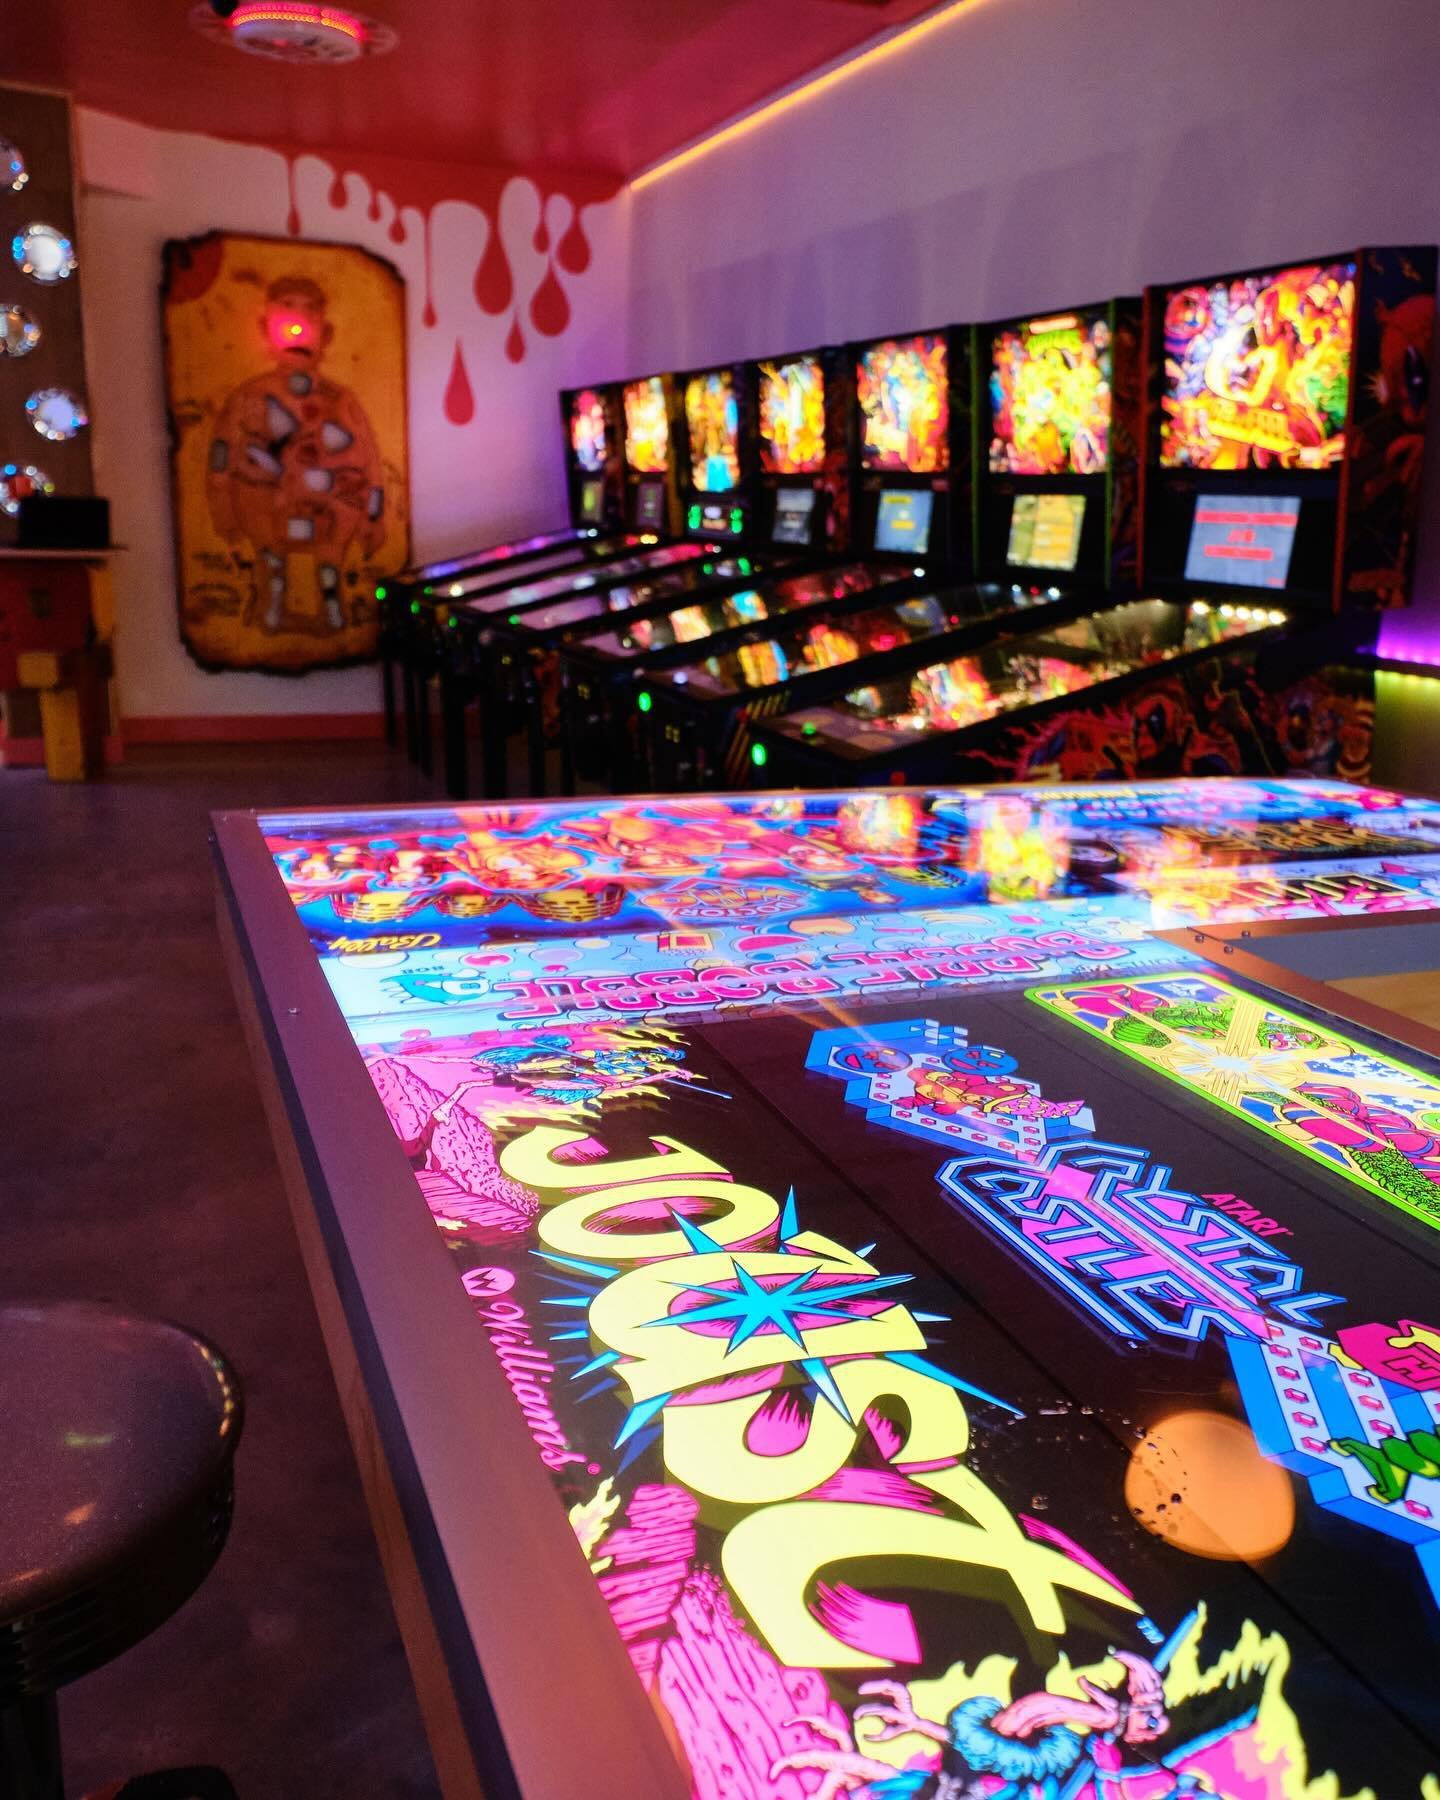 Playing Games is a good thing here! Calling all Players, get your Game On at Tin Pin Game Bar this weekend. Find us at The Avenues at East Cobb.